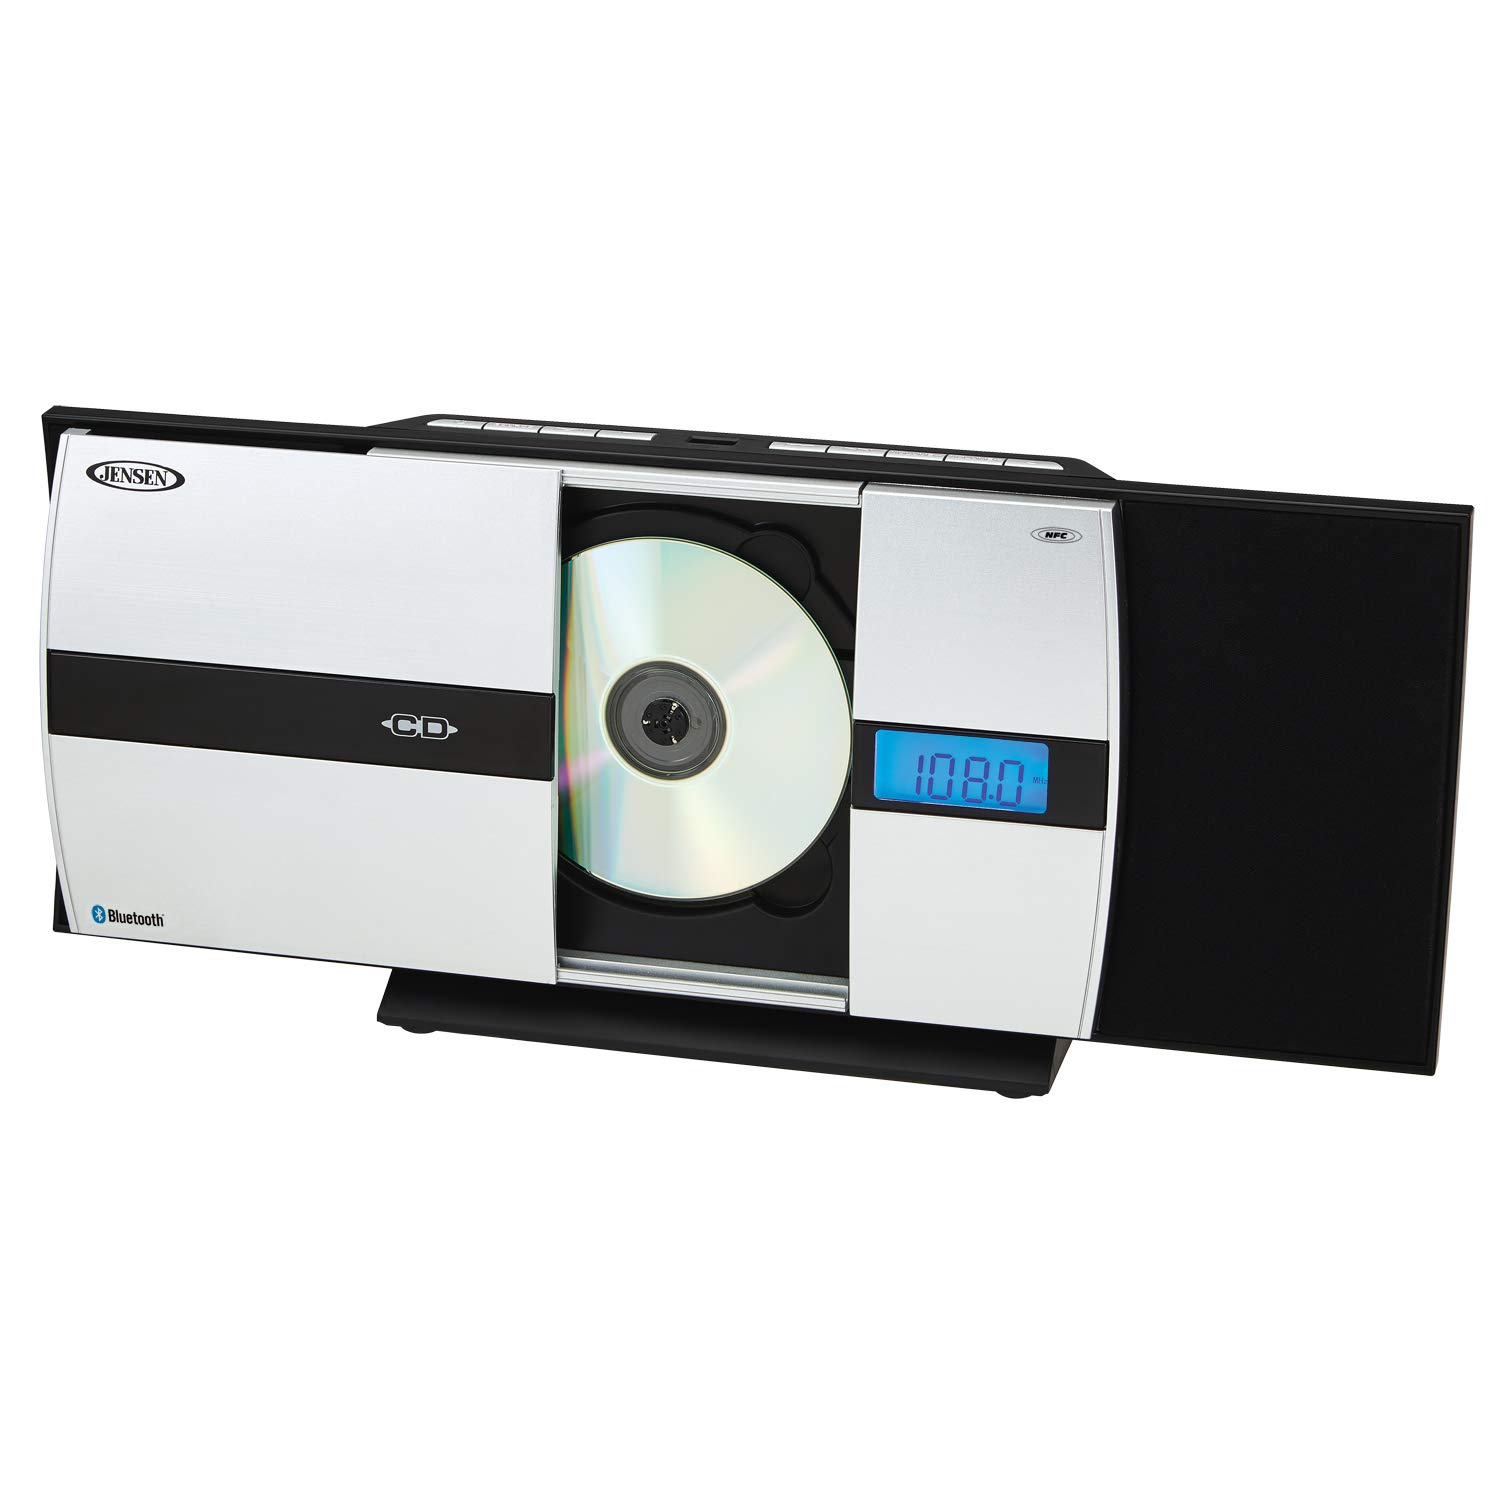 Jensen Wireless Bluetooth CD Player with FM Radio and Wall Mountable Option - image 2 of 5